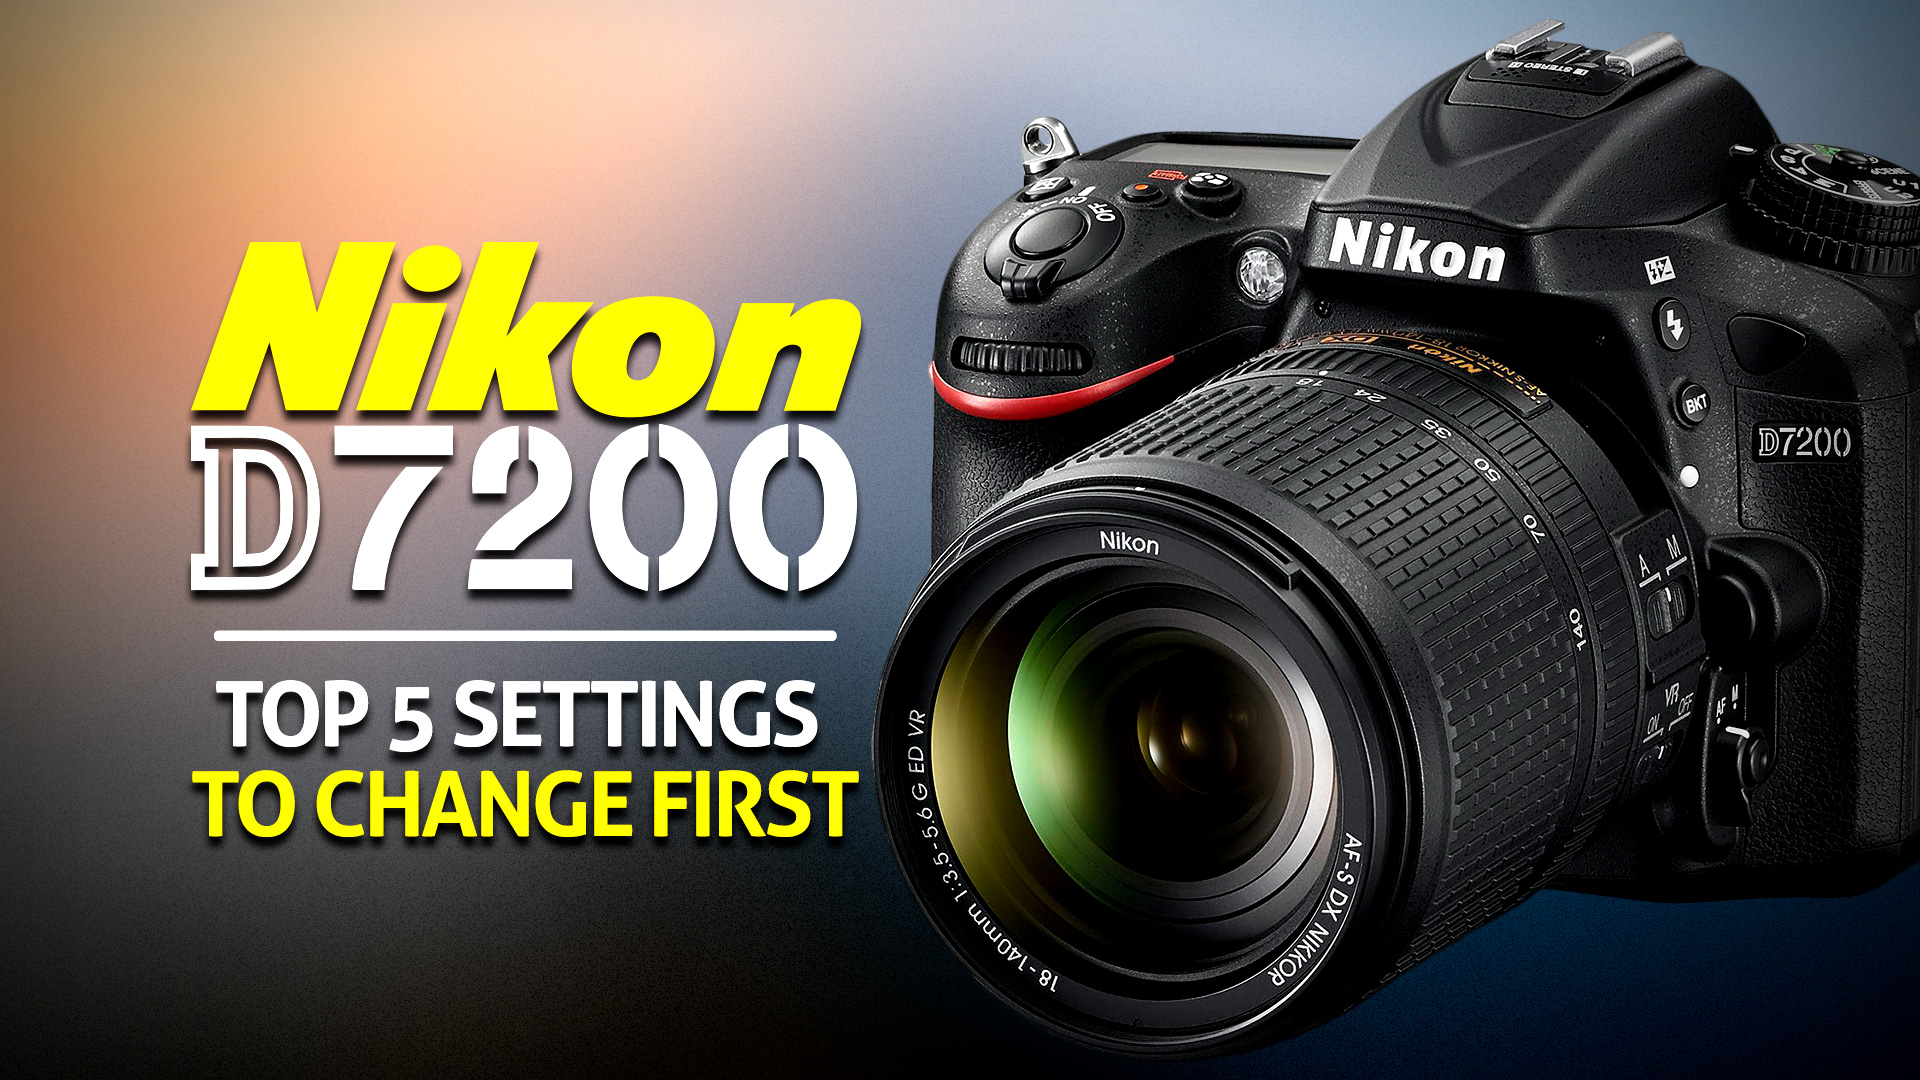 Top 5 settings to change on the Nikon D7200